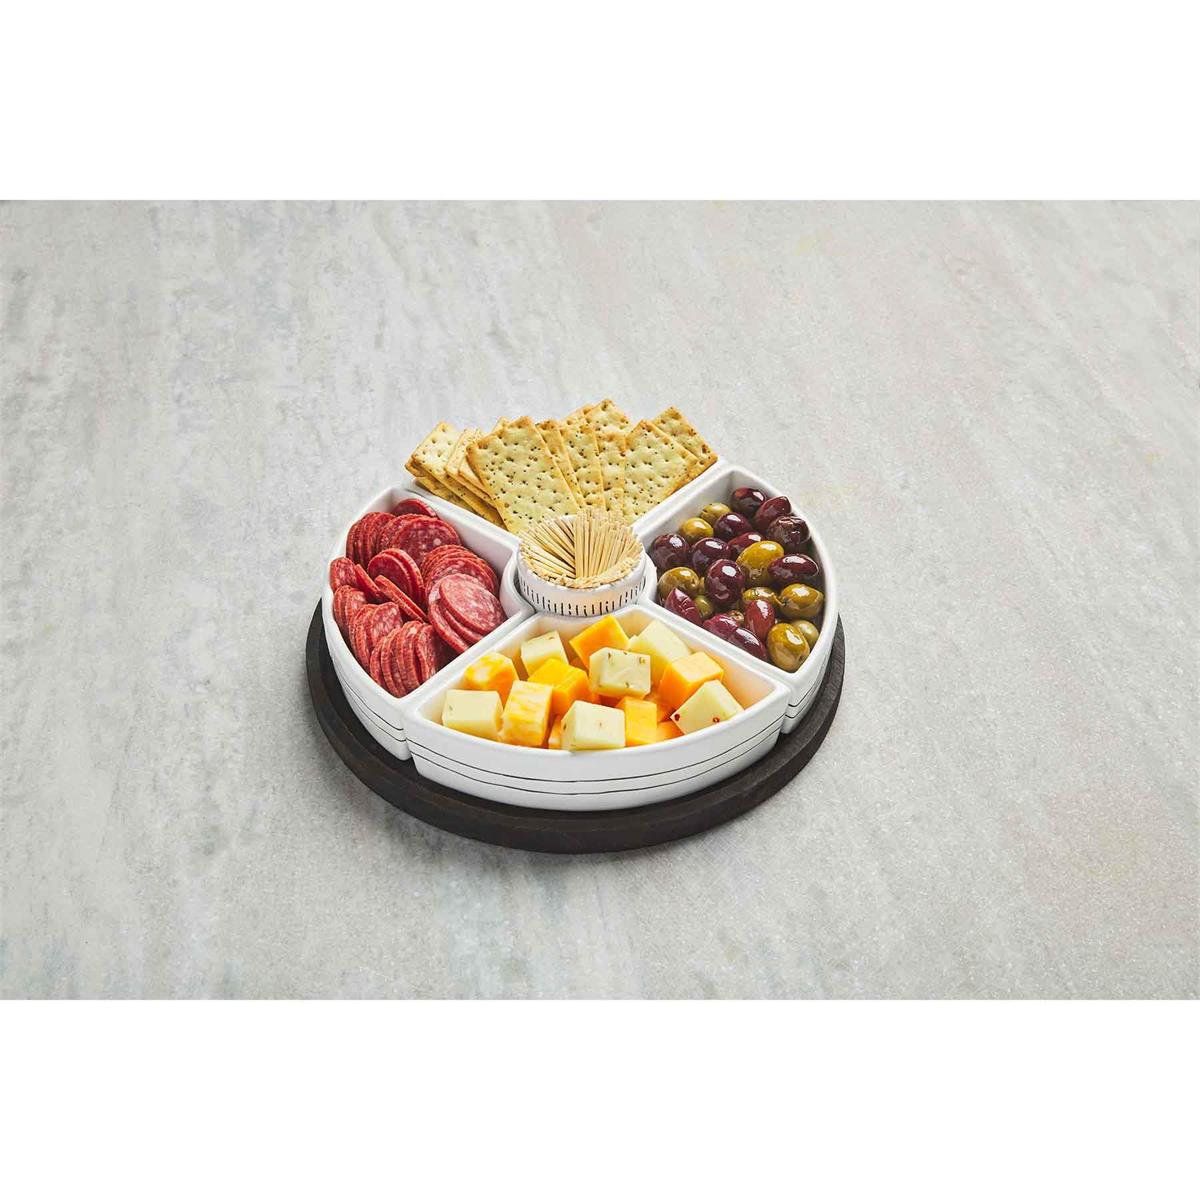 6-Piece Hors D'oeurves Tray - Madison's Niche 